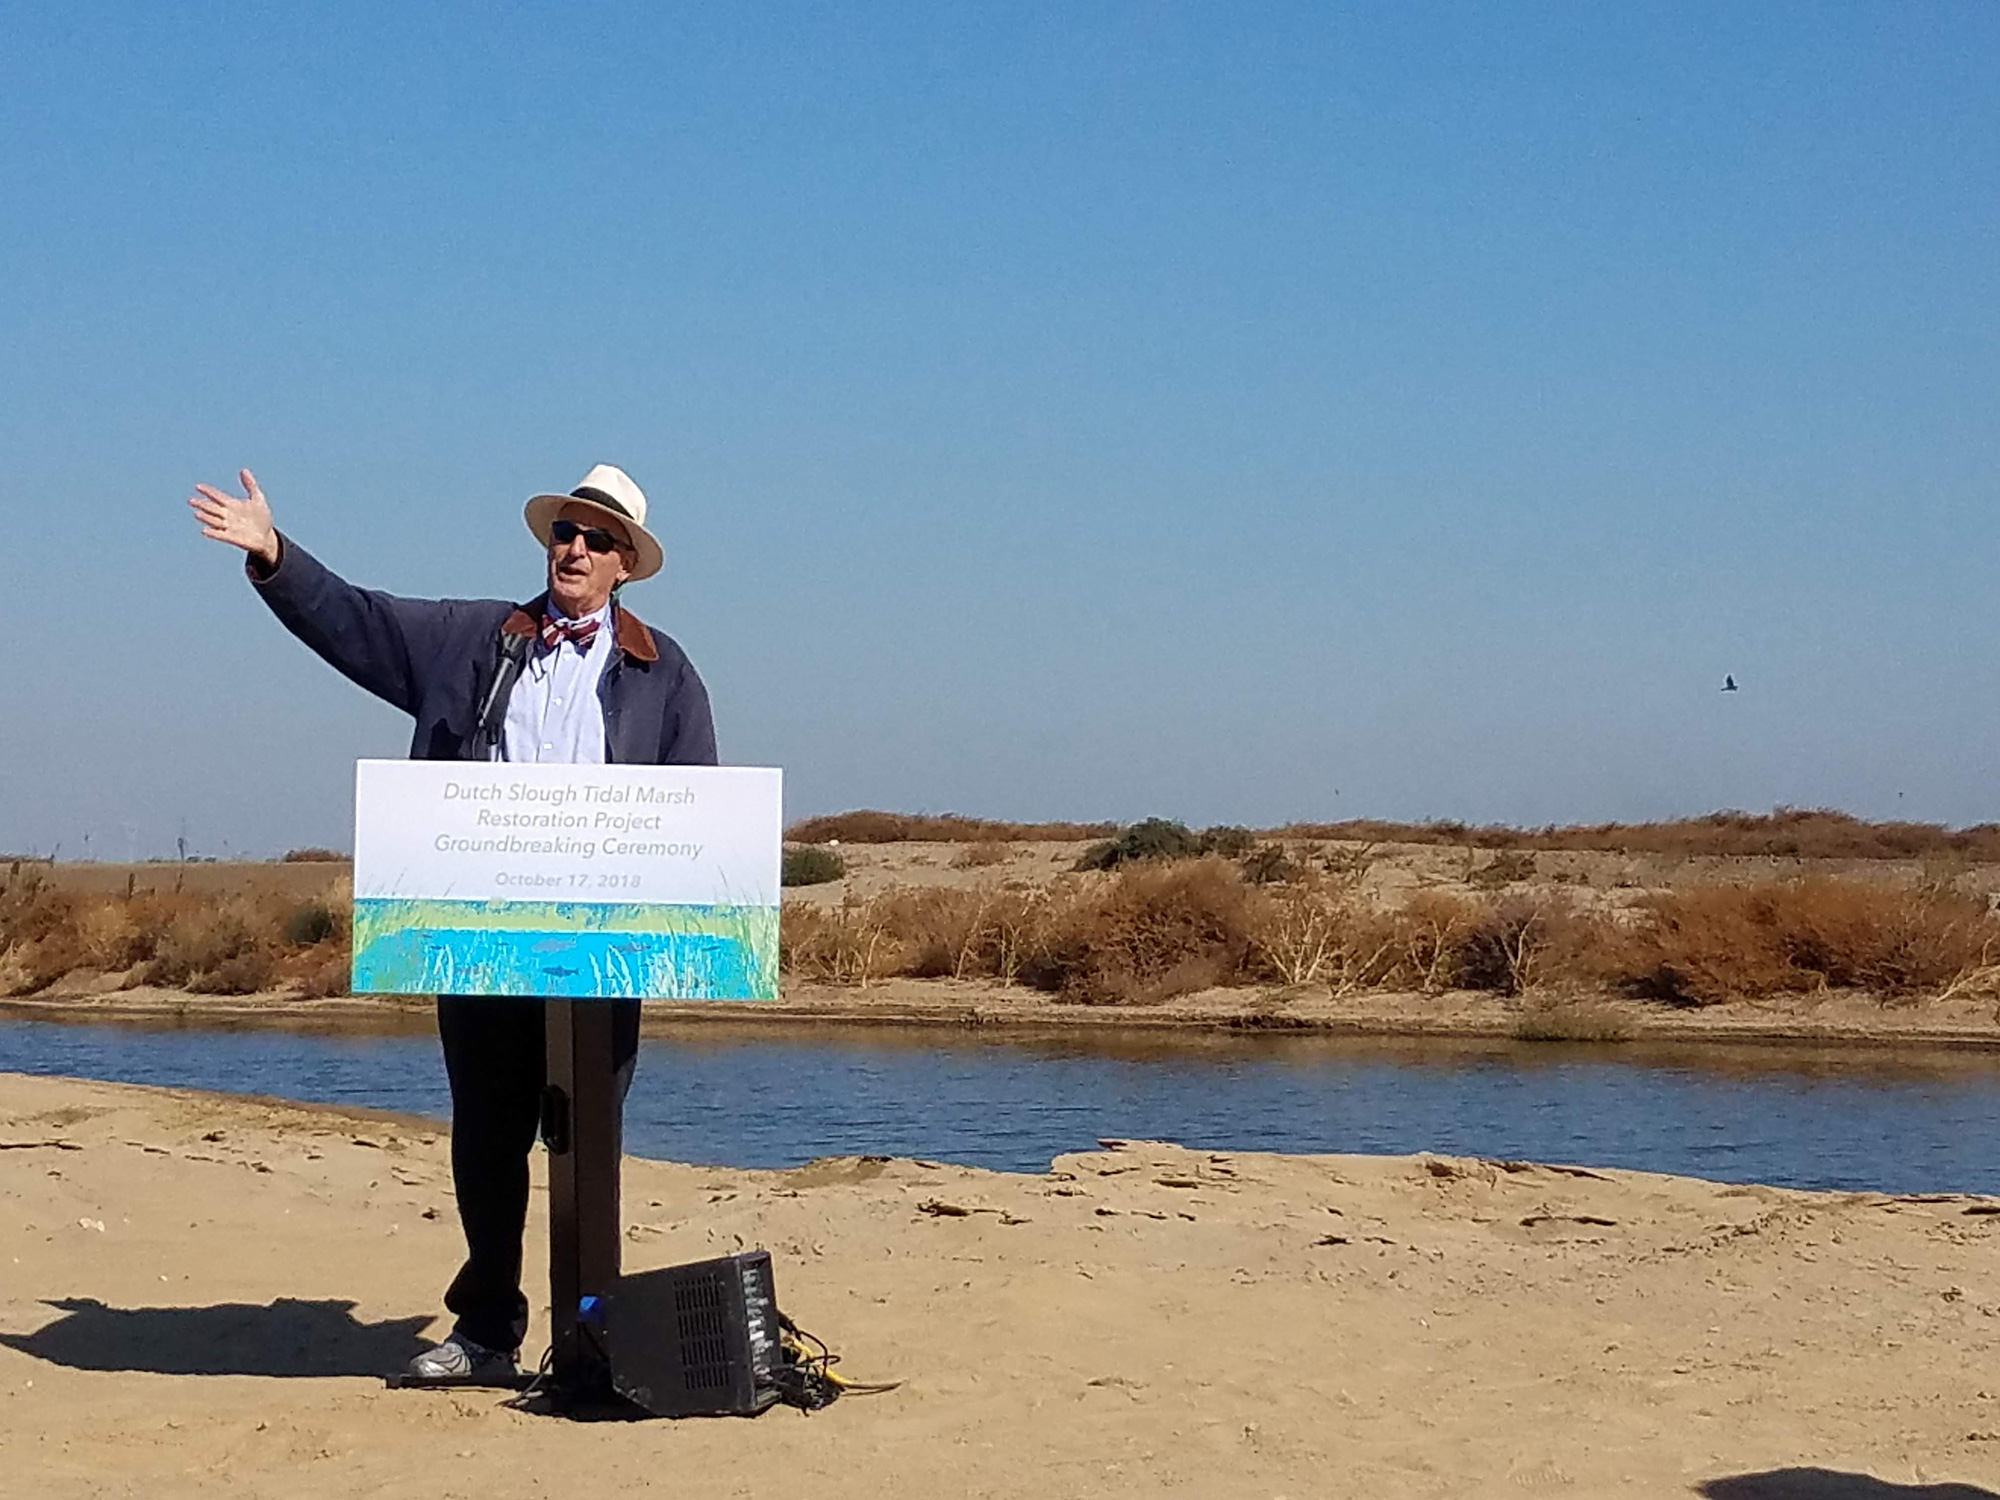 Ode to Sam: A Legacy of Partnership for Sam Schuchat’s 20 Years at the Coastal Conservancy